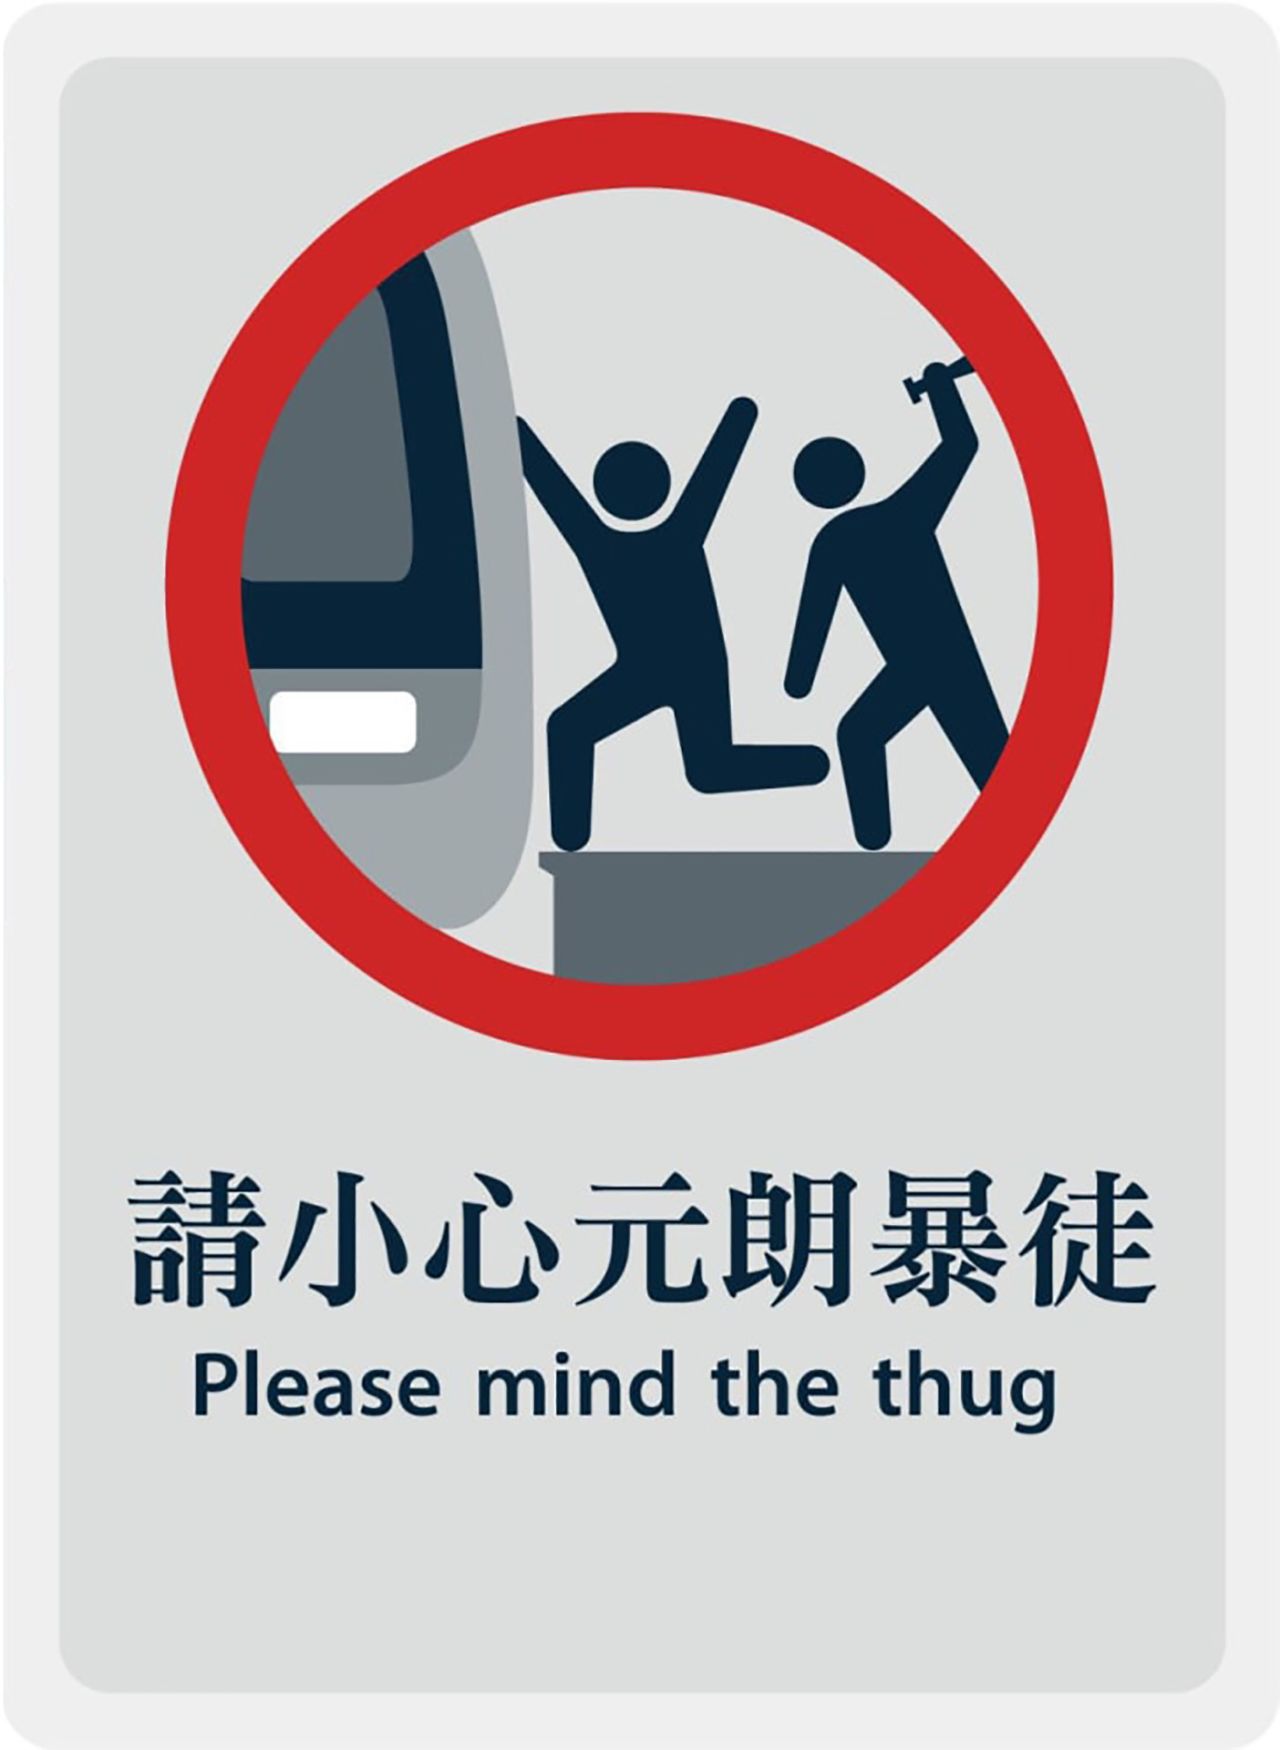 This poster is a play on "mind the gap" signs in the subway. It's a reference to a mob attack that injured 45 people in July. Men in white t-shirts and poles attacked anti-extradition bill demonstrations at a metro station in Yuen Long. 